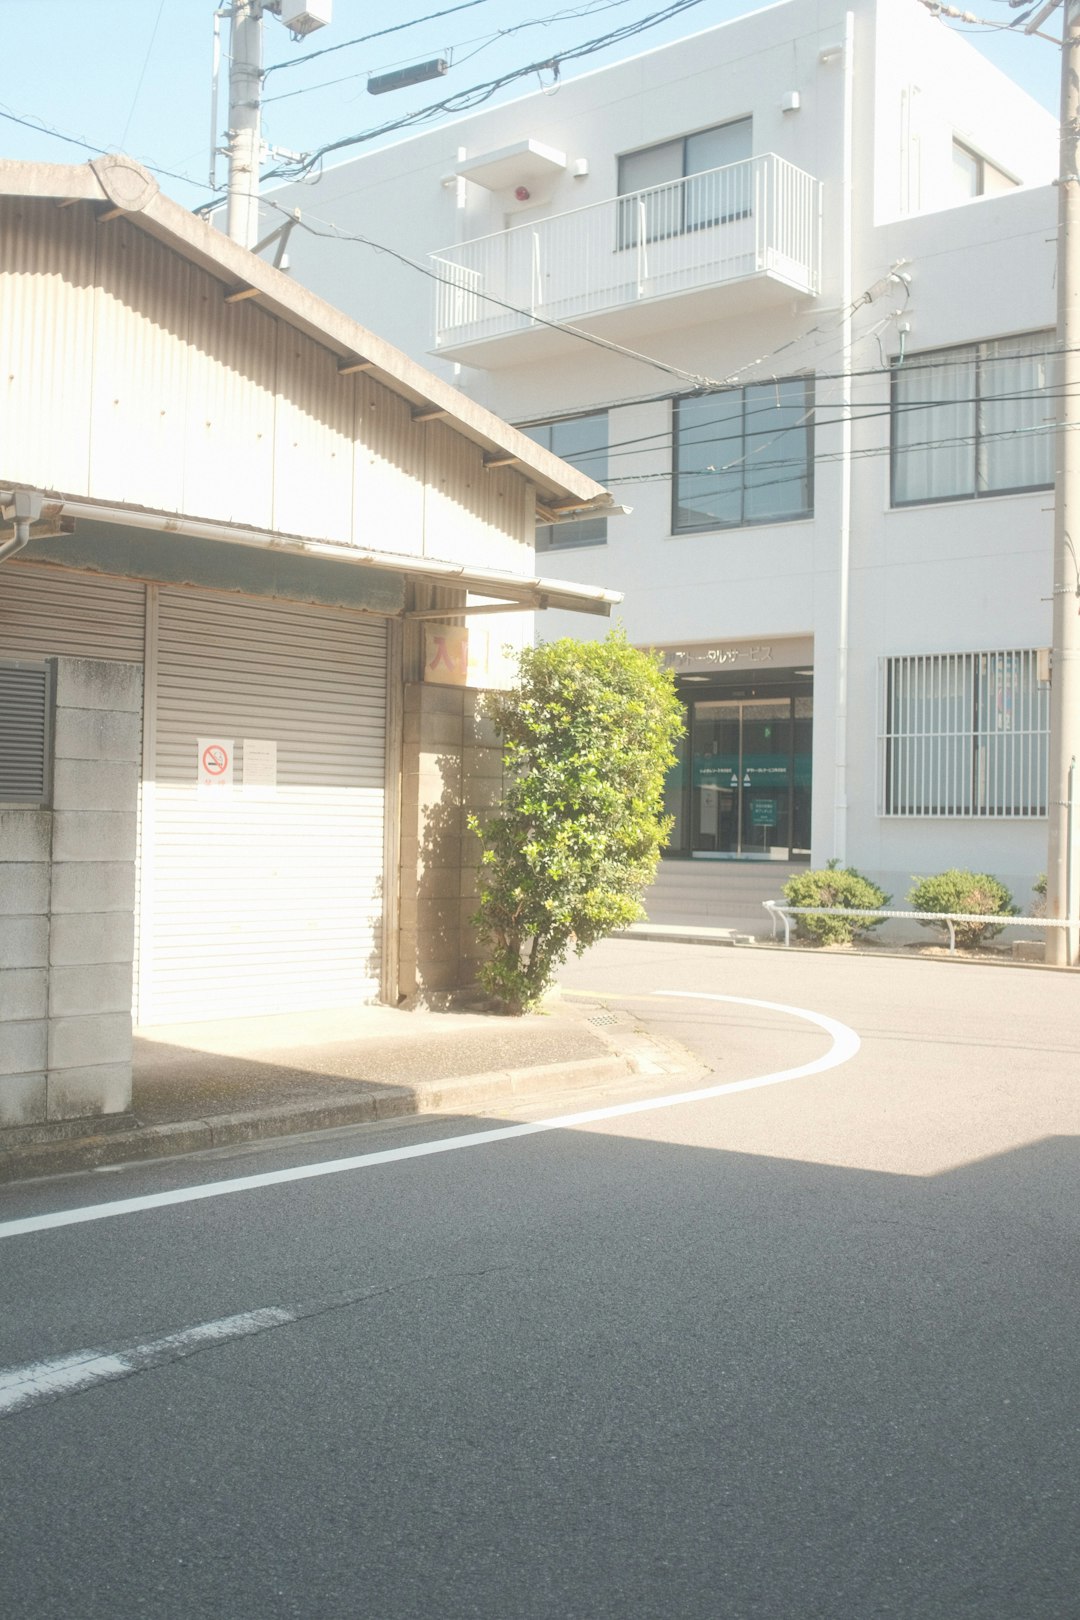 green tree beside white concrete building during daytime